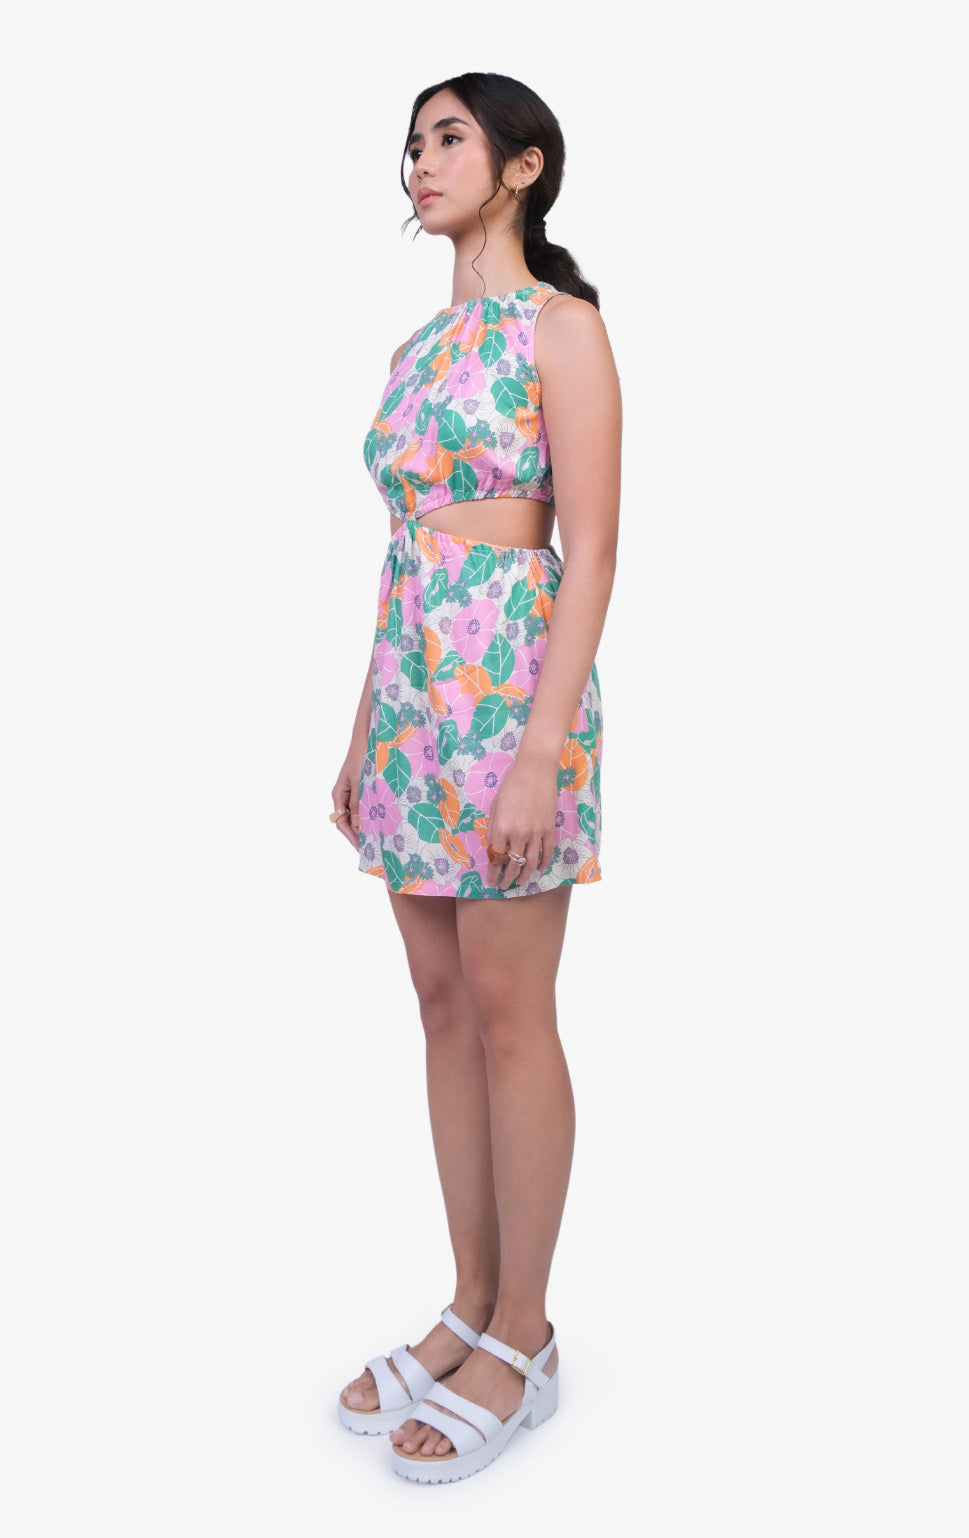 GROOVY FLORAL PRINT HALTER CUT OUT DRESS